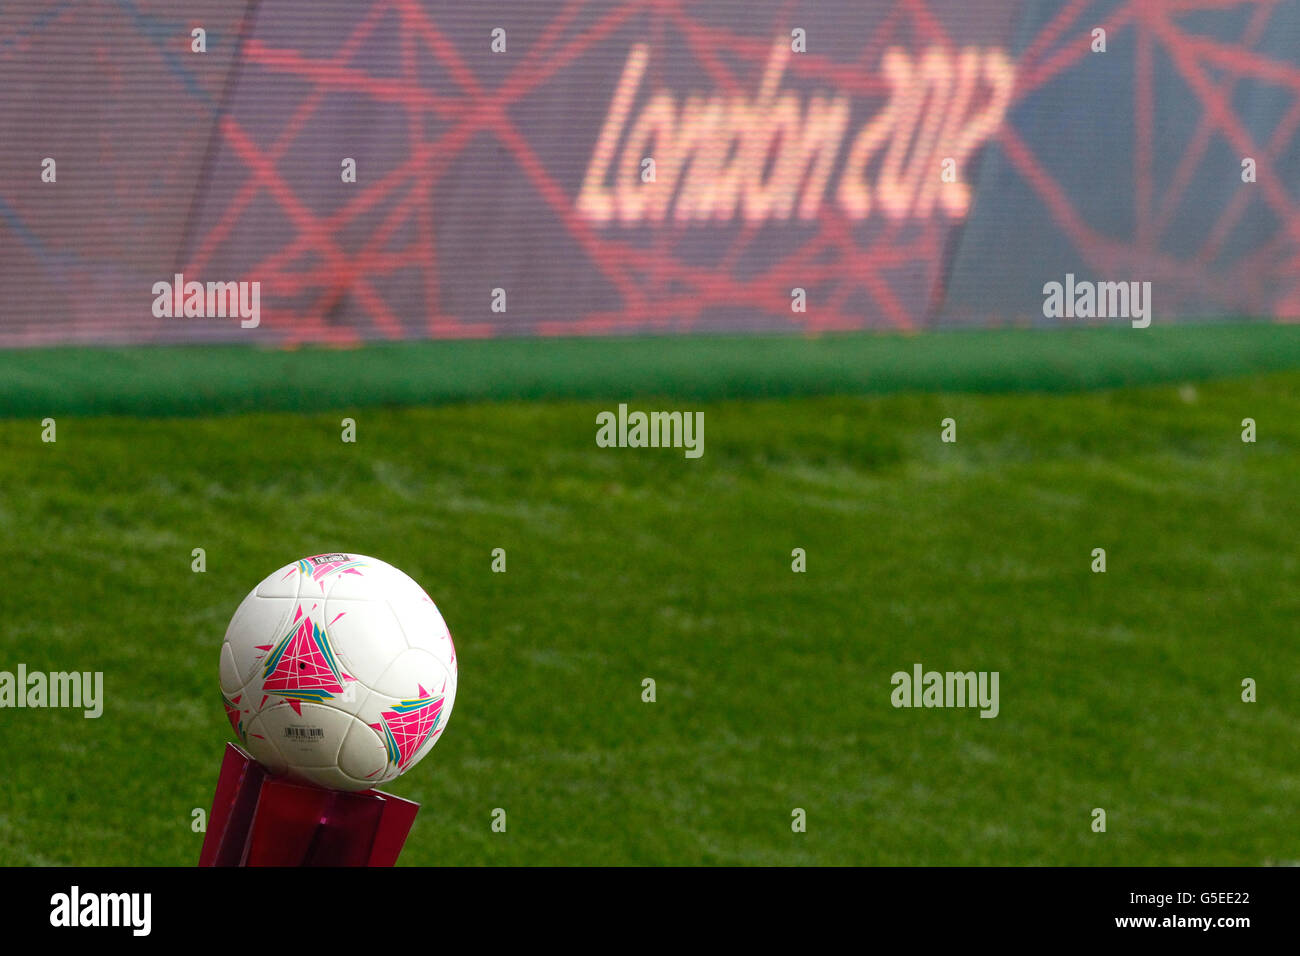 London Olympic Games - Games competitions - MON. The match ball on a stand prior to kick-off Stock Photo